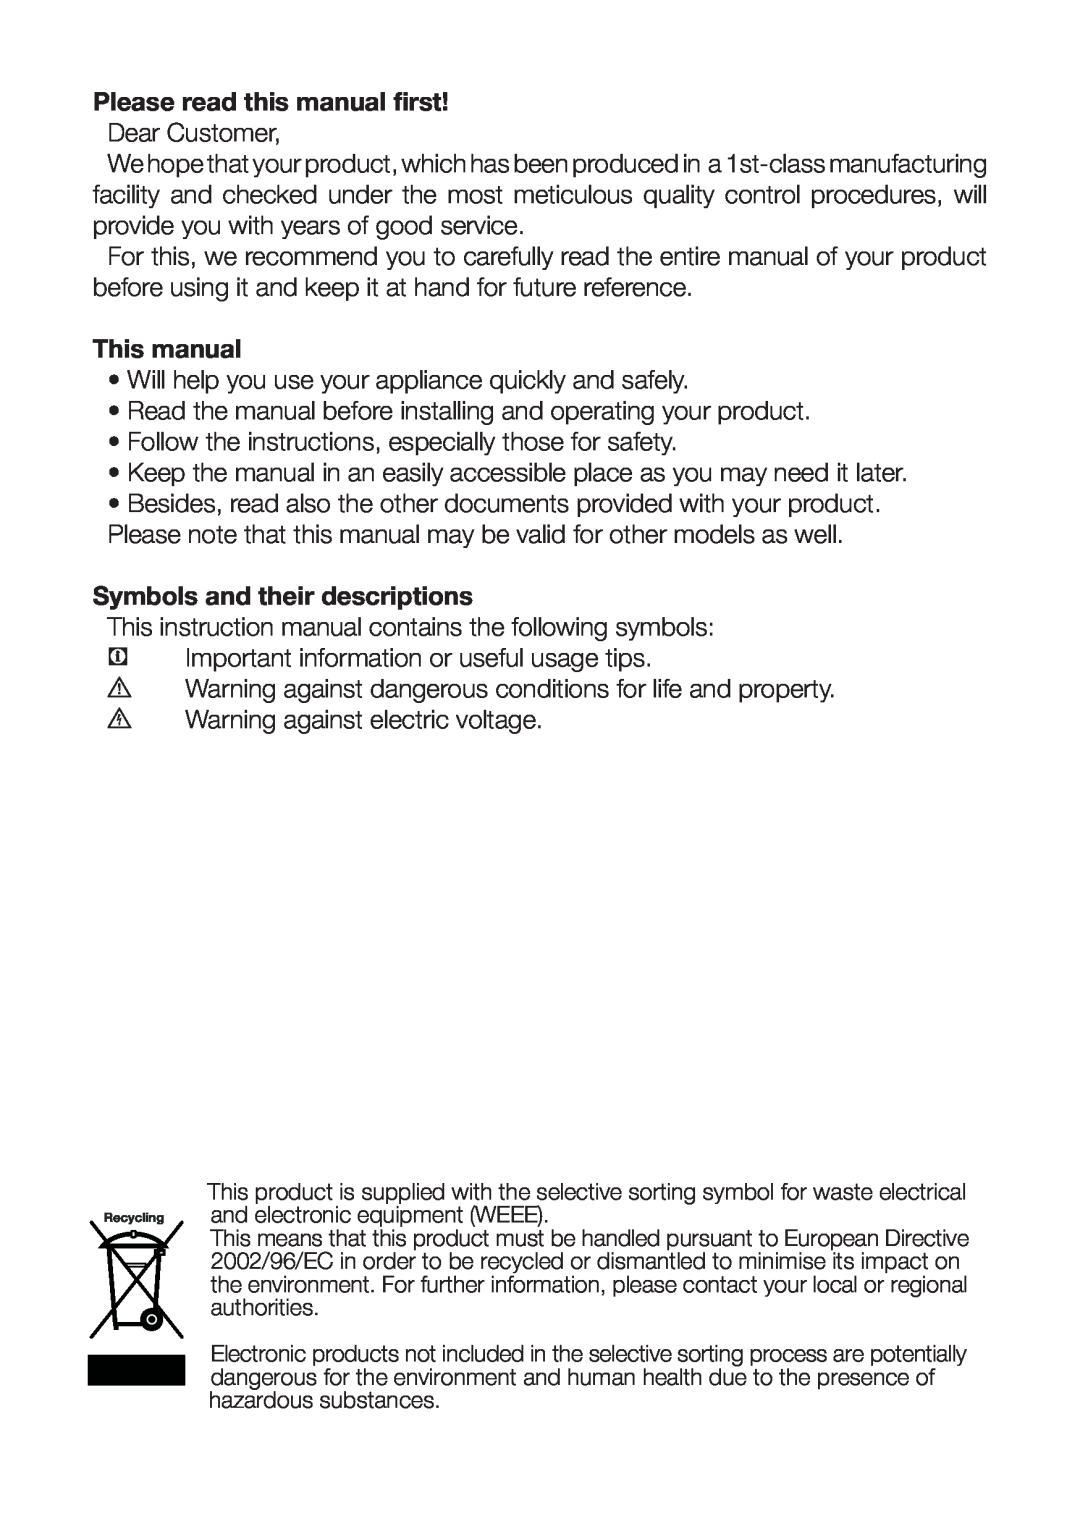 Beko CT5381APW Please read this manual first, This manual, Symbols and their descriptions 